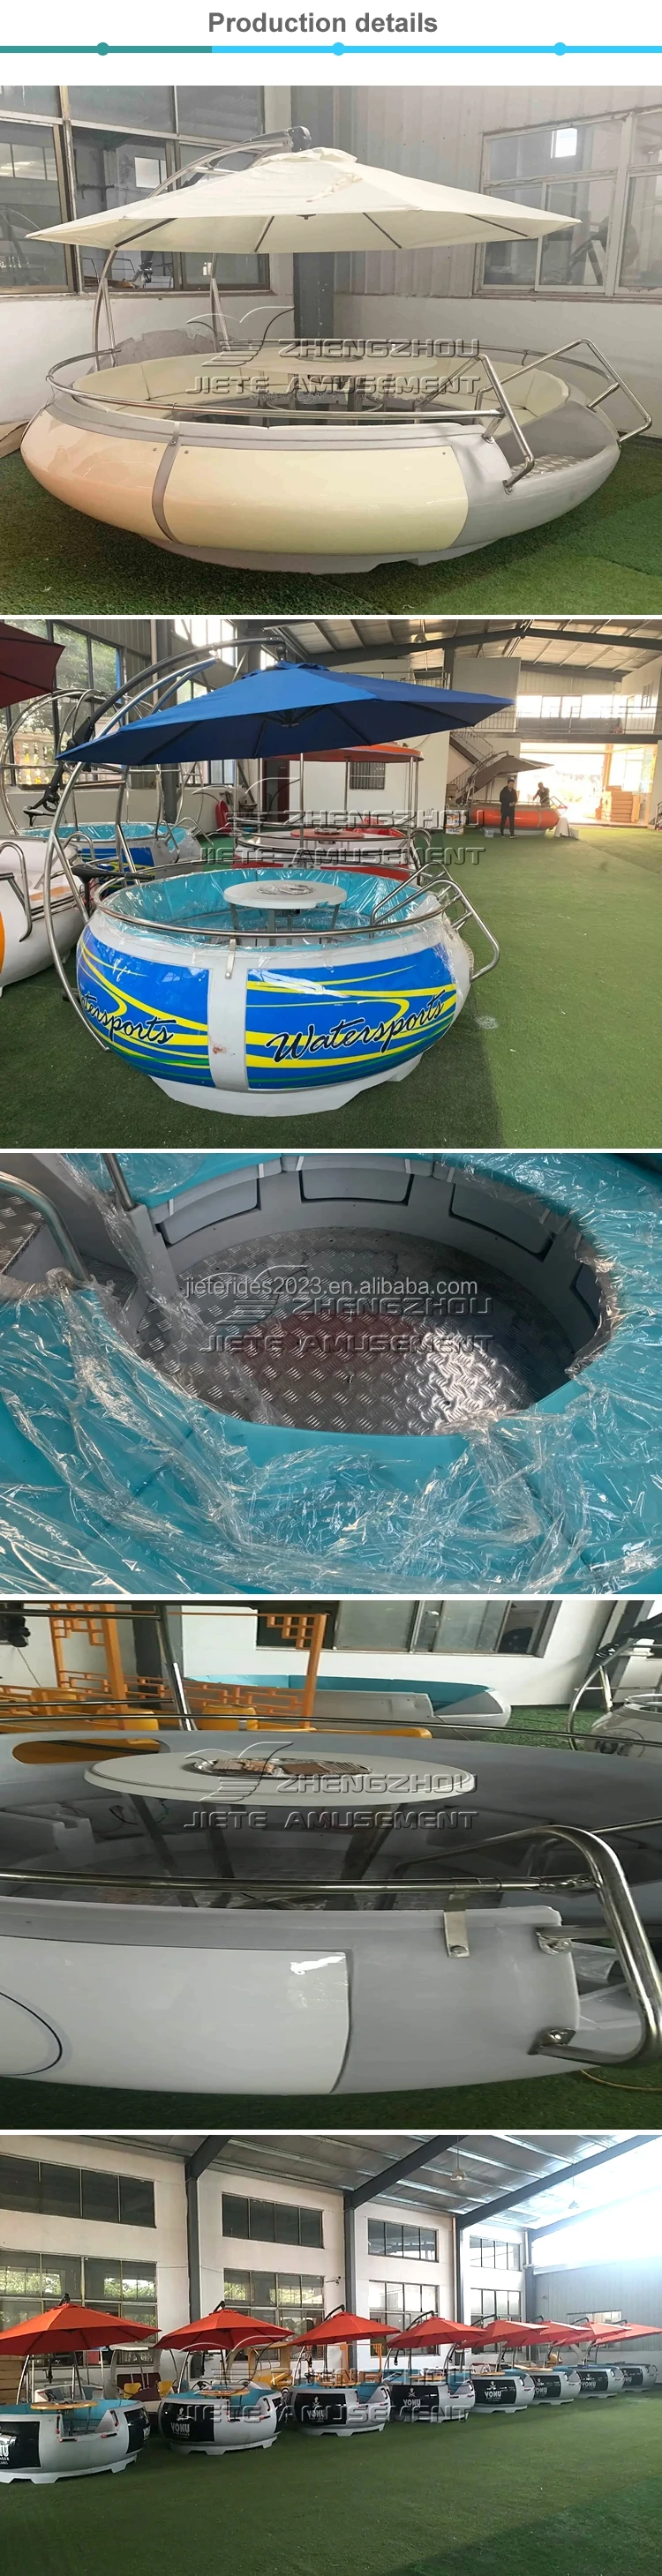 Recyclable Electric motor barbecue boat with Inflatable game nightclub ride-ons castle pool bubble house inflatable water slide